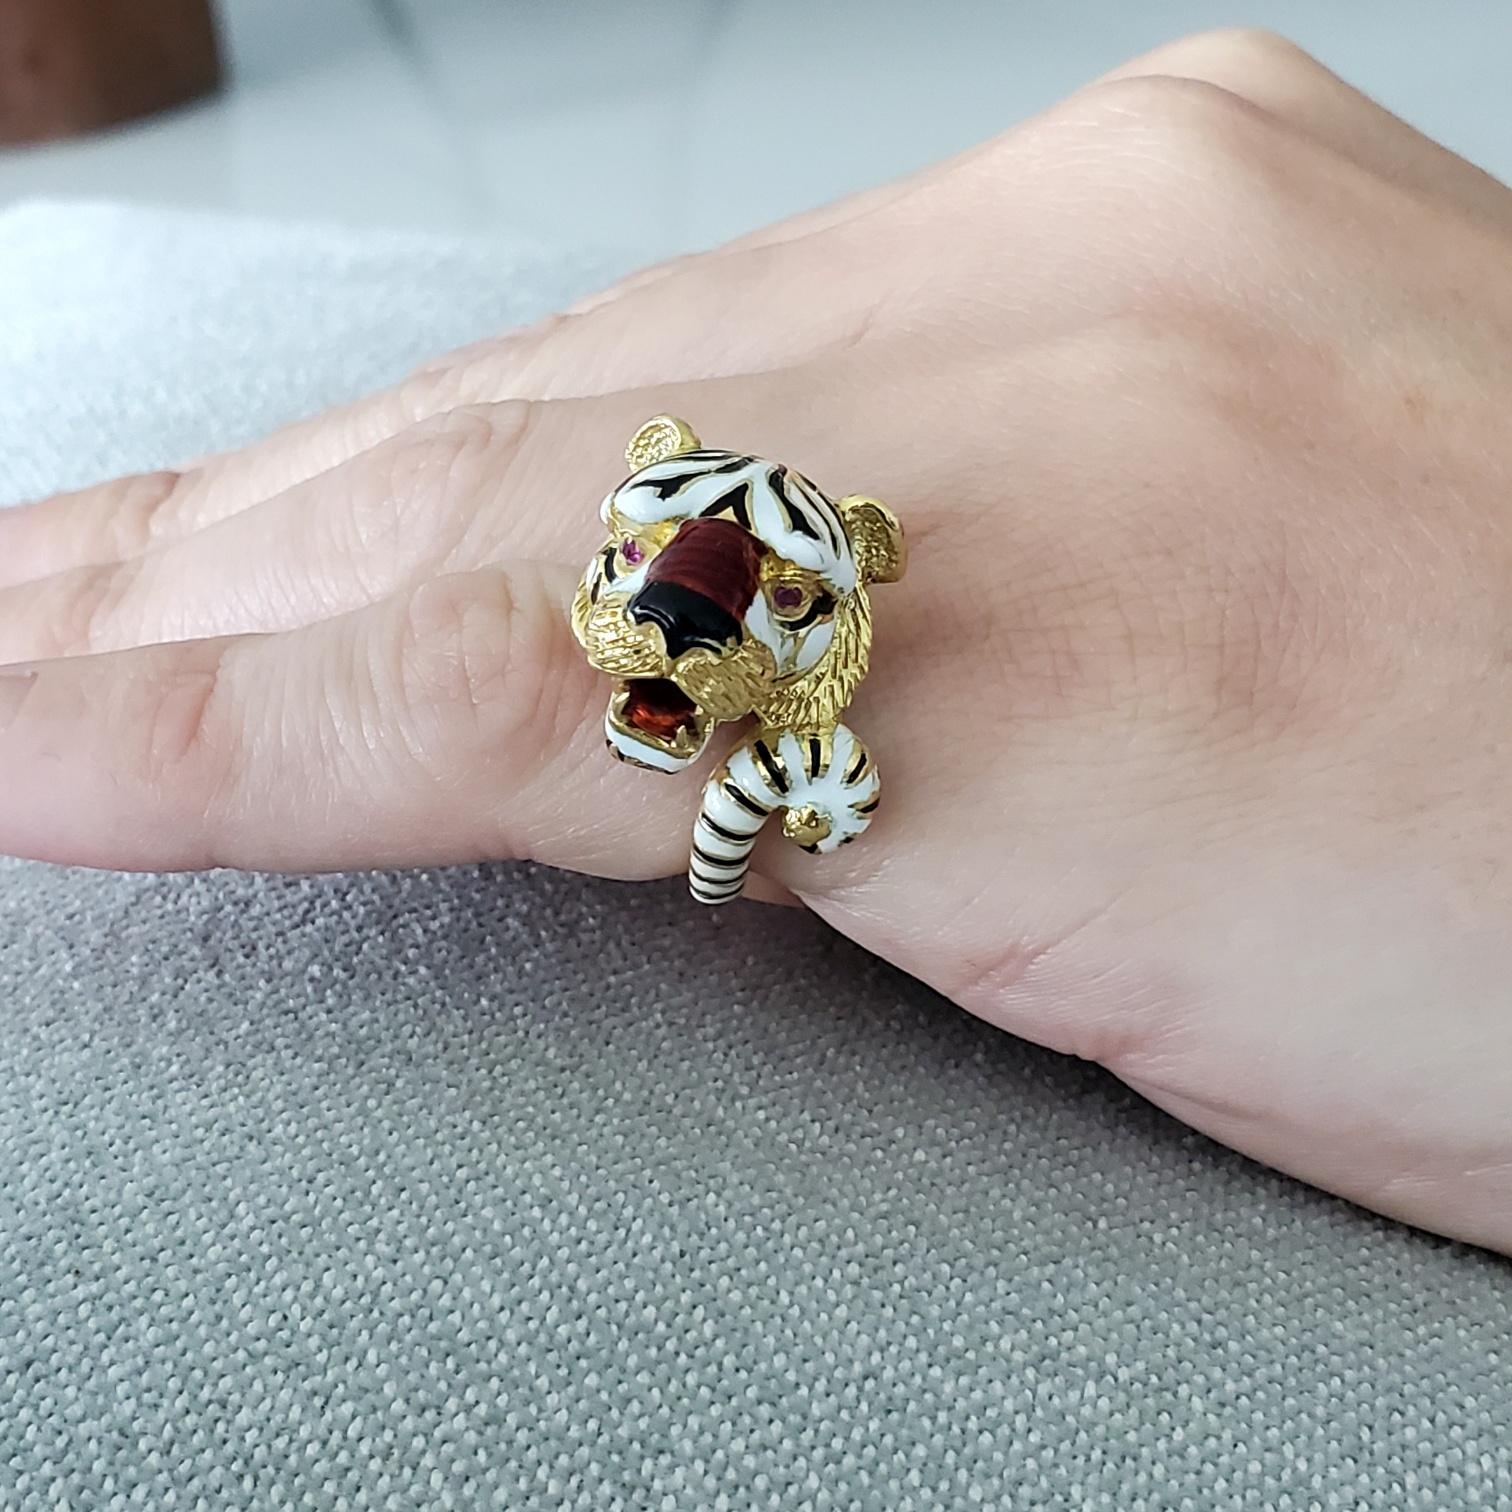 Frascarolo Milano Enameled Tiger Cocktail Ring in 18Kt Yellow Gold with Rubies 4